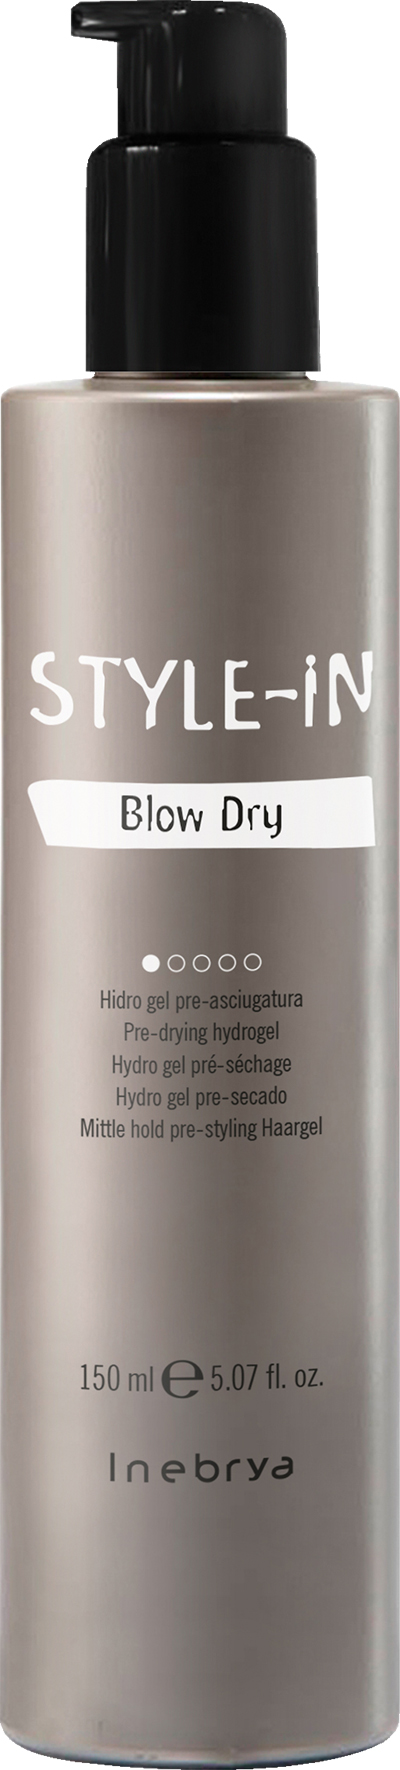 Style in Blow Dry, 150 ml